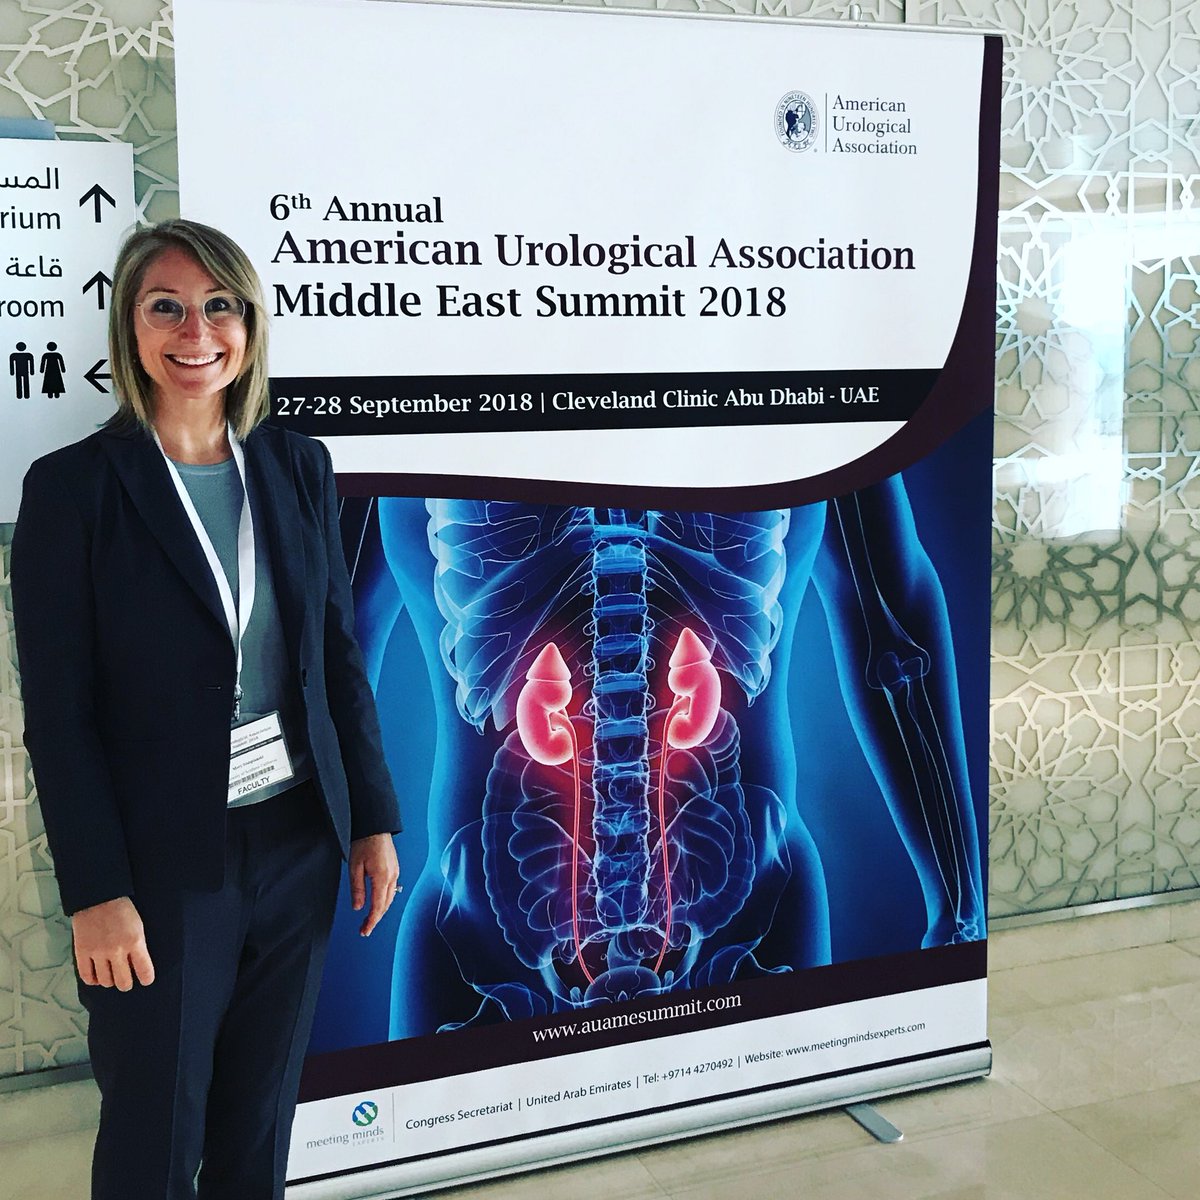 Honored to be presenting on #sperm and #maleinfertility for the @AmerUrological at @ClevelandClinic in beautiful Abu Dhabi. @USC_Urology @USCFertility #malefactor #ivf #urologyweek #mensheath @DCYBalls @DoctorSotelo @GerhardFuchs9